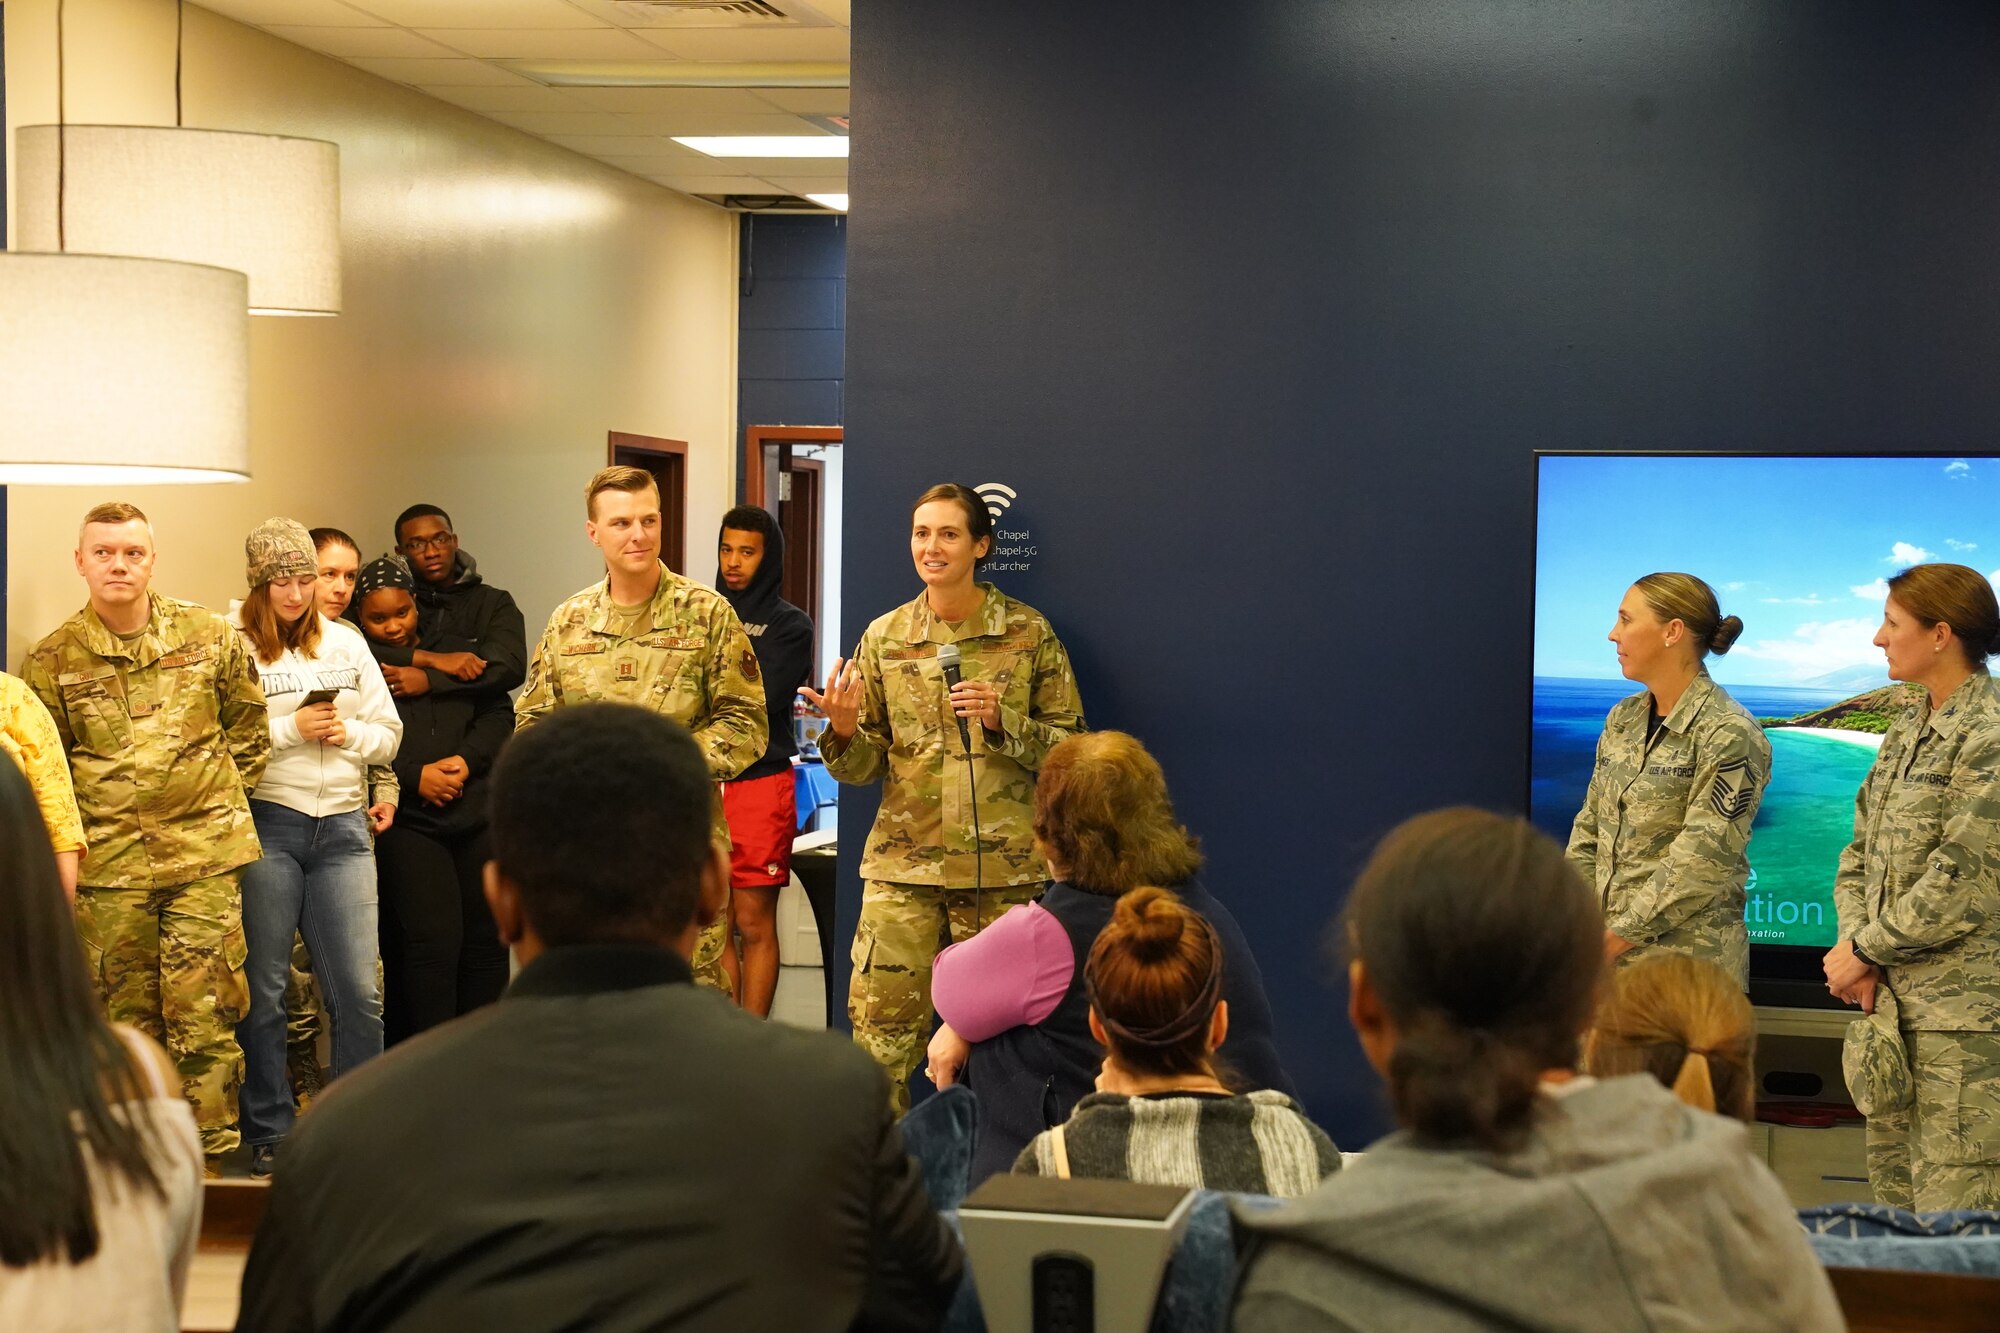 U.S Air Force Col. Heather Blackwell, 81st Training Wing commander, gives remarks during the opening of The Lighthouse inside the Larcher Chapel at Keesler Air Force Base, Mississippi, Nov. 1, 2019. The Lighthouse is a place dedicated to permanent party Airmen complete with gaming stations, massage chairs, a kitchen, and a music room. The idea of the lighthouse stemmed from a meeting Col. Heather Blackwell, 81st Training Wing commander, had with some of Keesler's dorm residents in August. (U.S Air Force photo by Airman 1st Class Spencer Tobler)